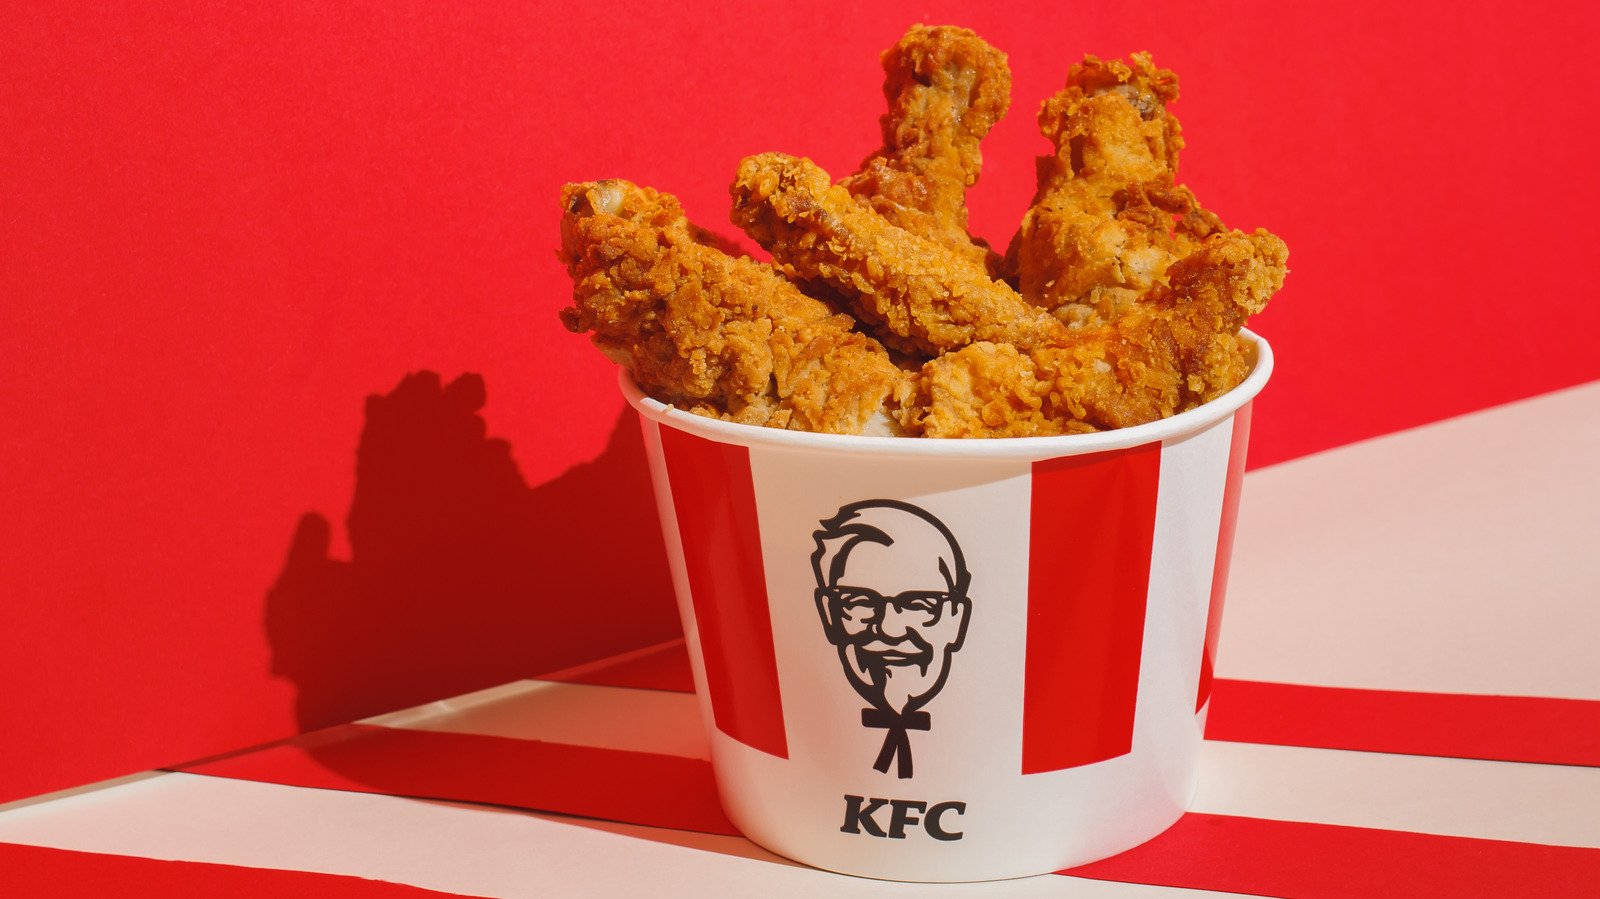 The KFC Xbox Controller You Never Knew Existed - Mashed